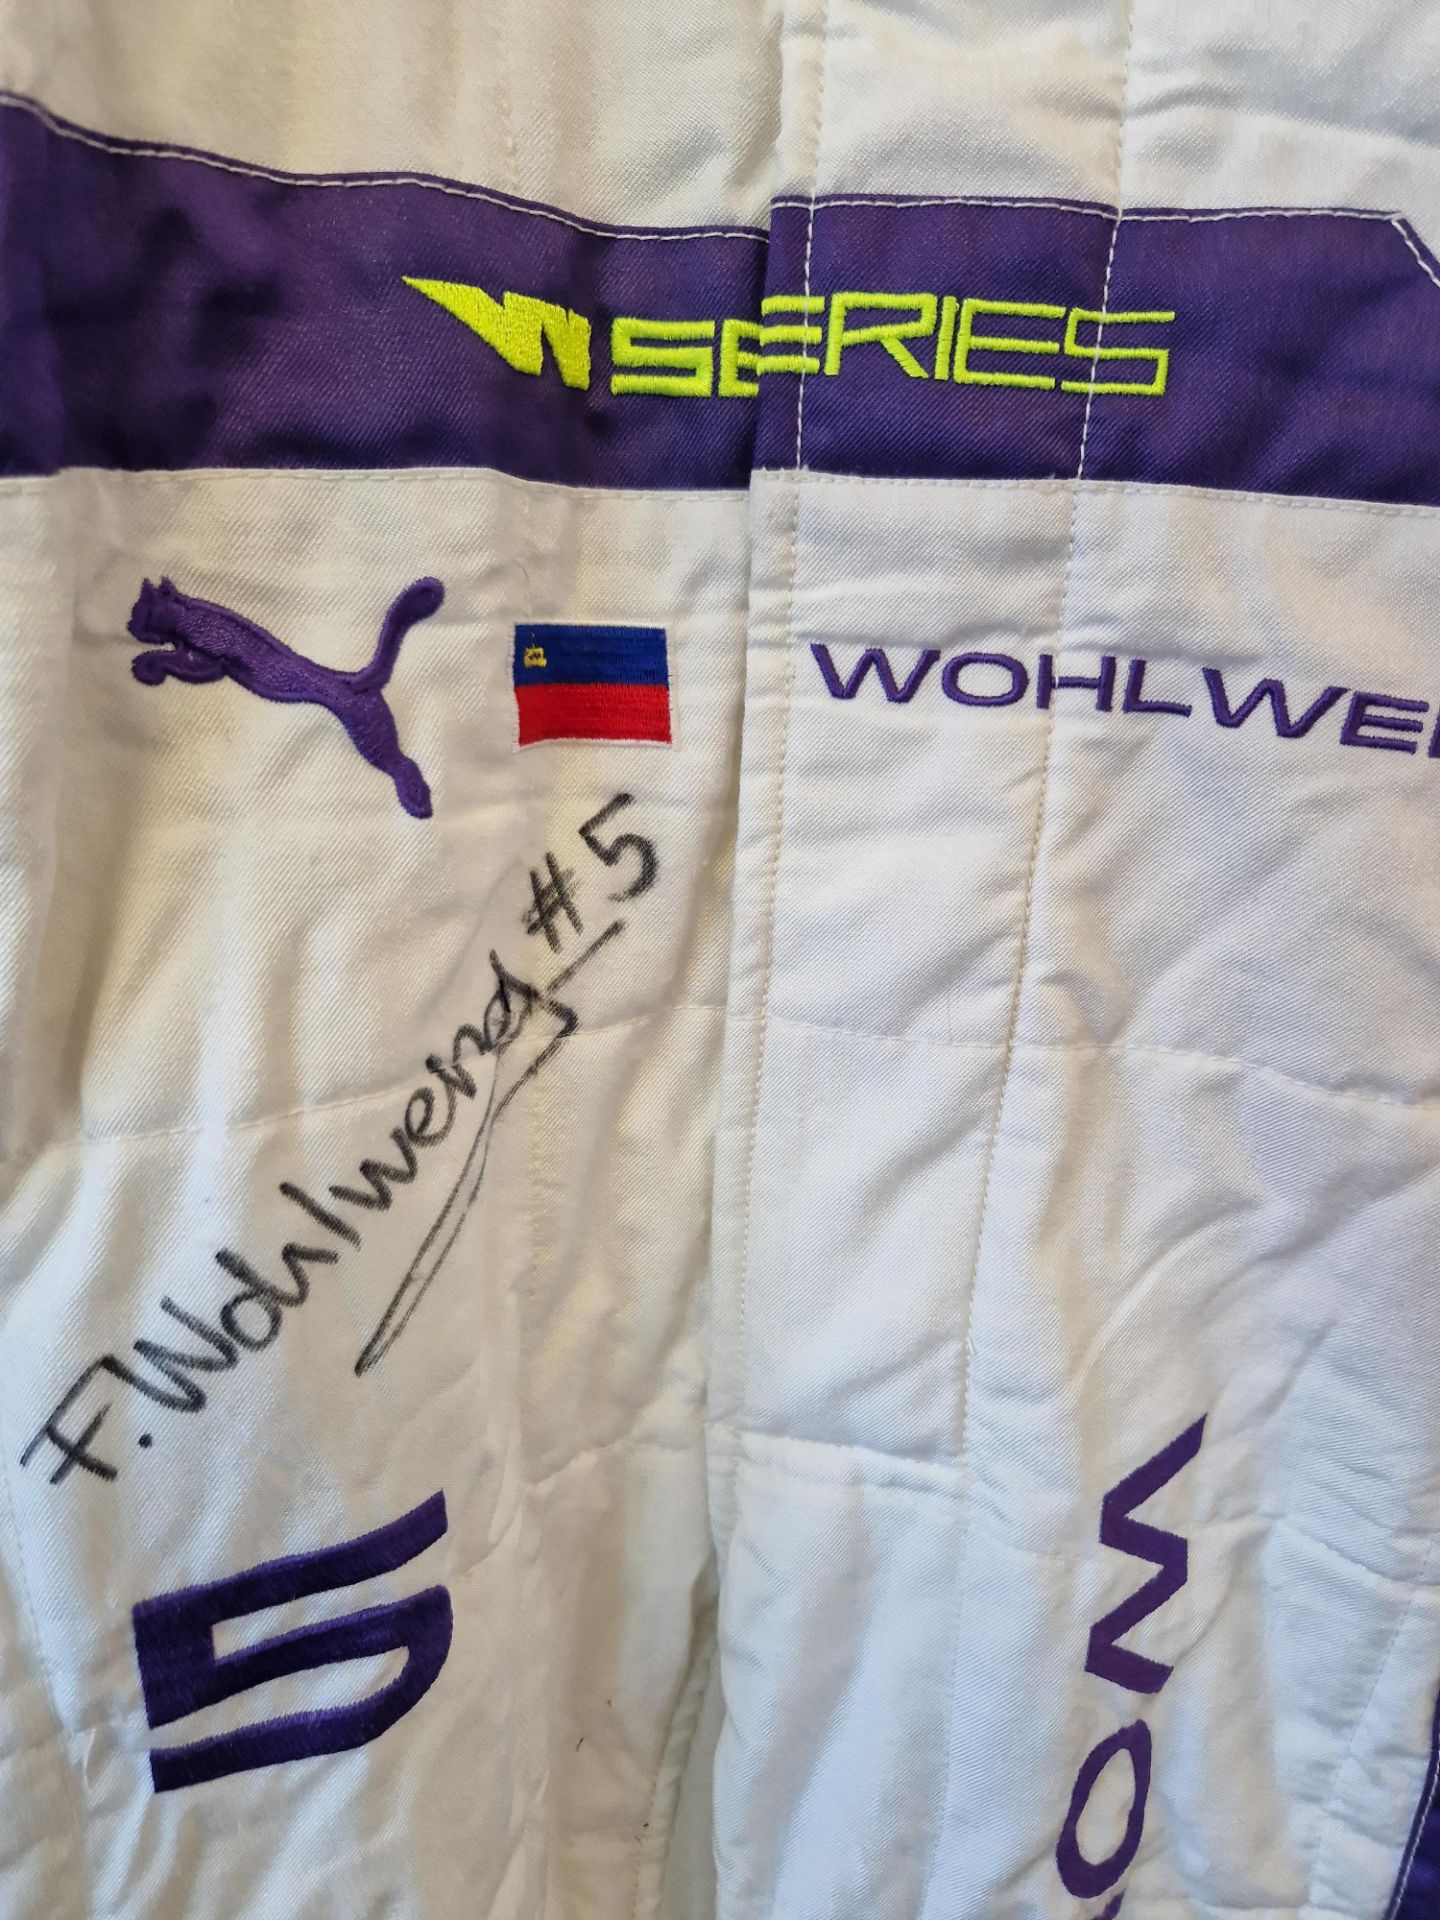 One PUMA FIA approved Race Suit (Size - Made to Measure) worn by Fabienne Wohlwend and signed by her - Image 2 of 2